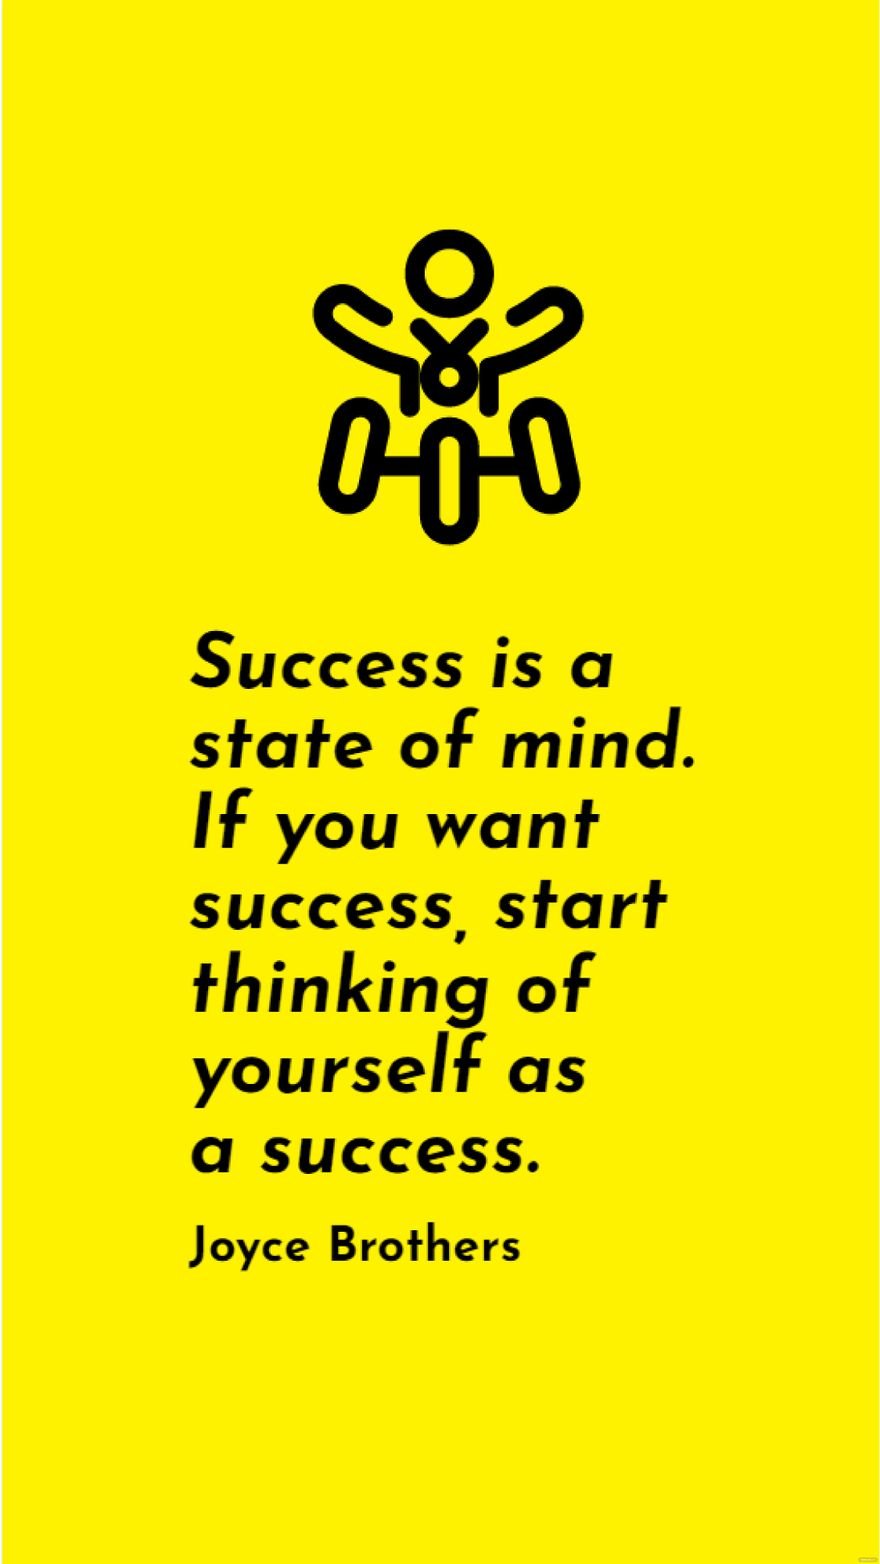 Joyce Brothers - Success is a state of mind. If you want success, start thinking of yourself as a success.